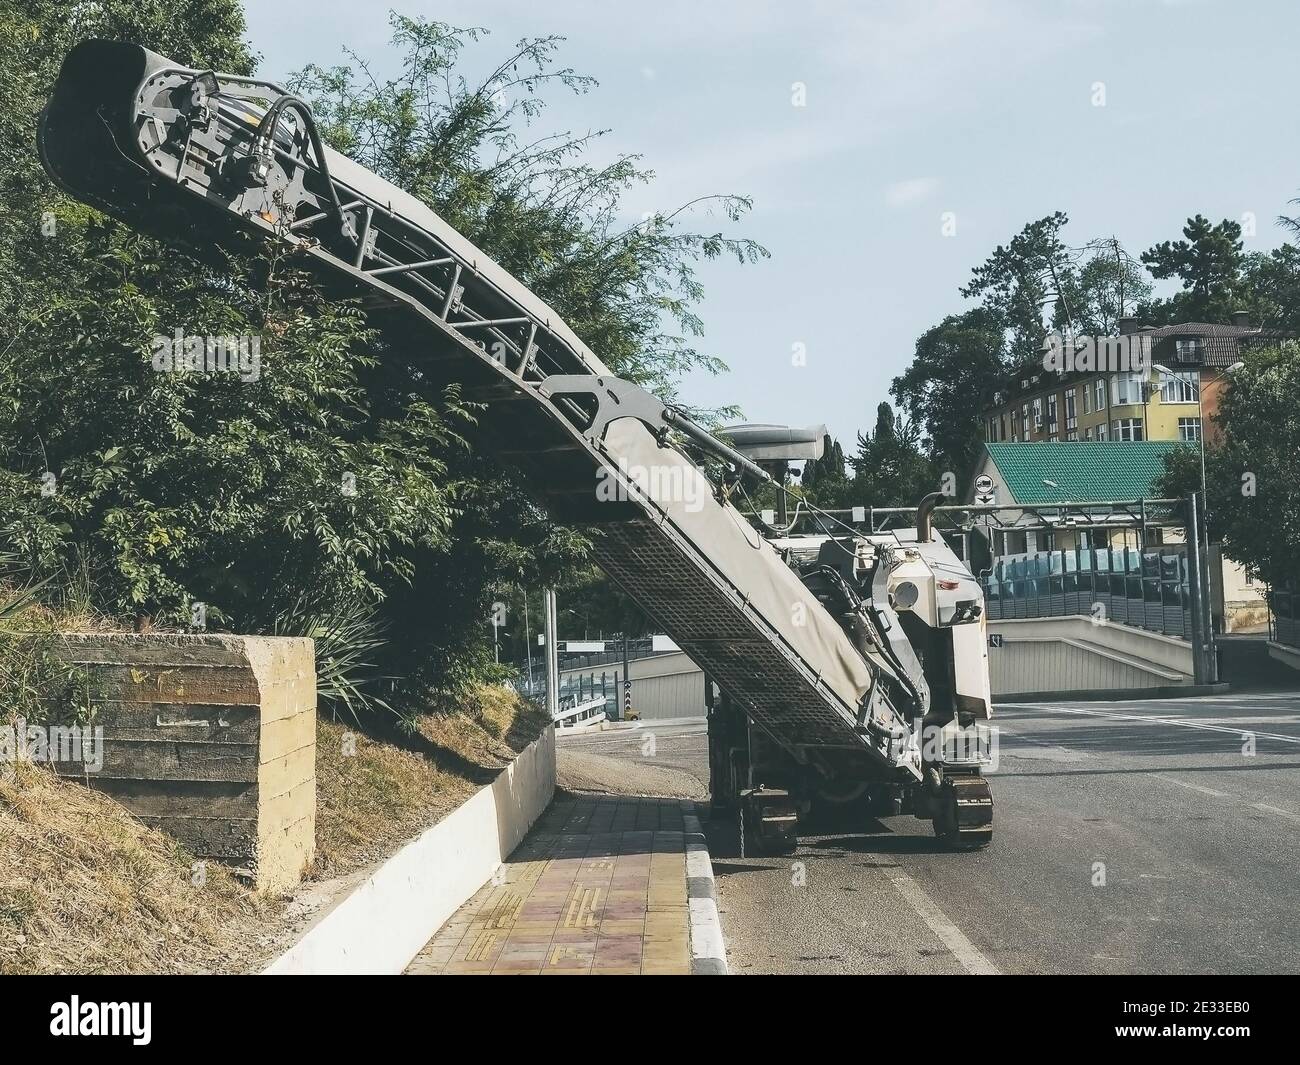 The road milling machine stands on side of the road near the sidewalk. Road service. Heavy industry Stock Photo